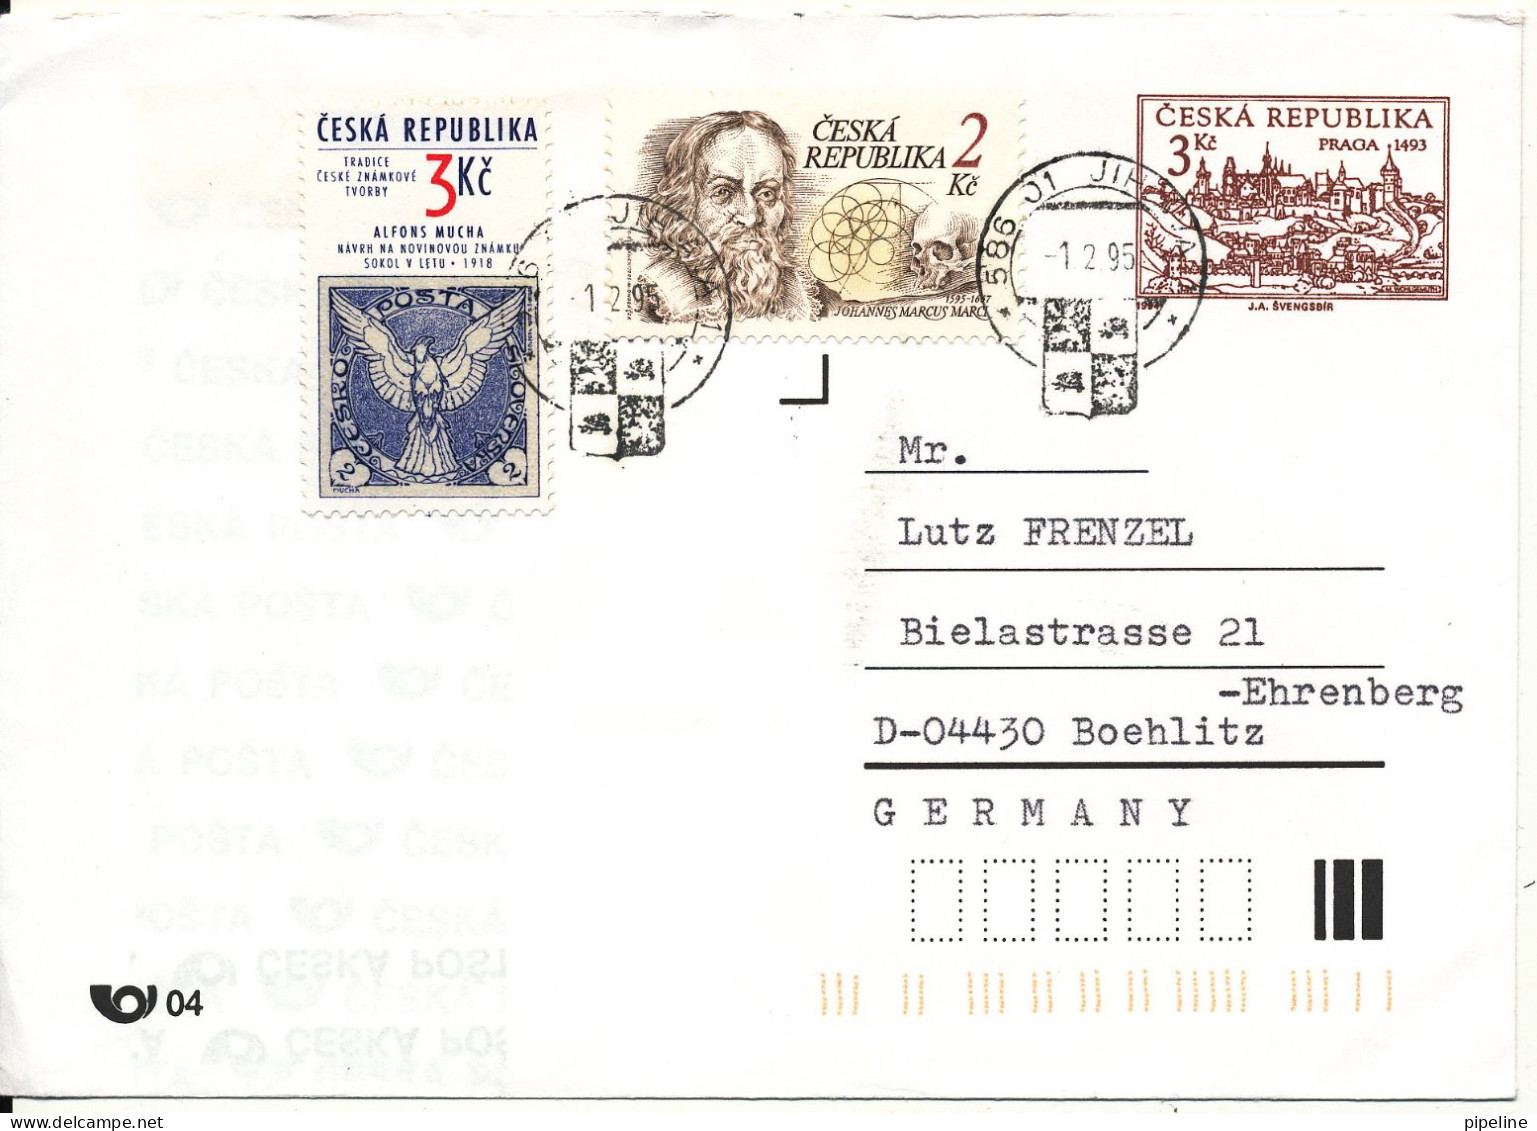 Czech Republic Uprated Postal Stationery Cover Sent To Germany 1-2-1995 - Briefe